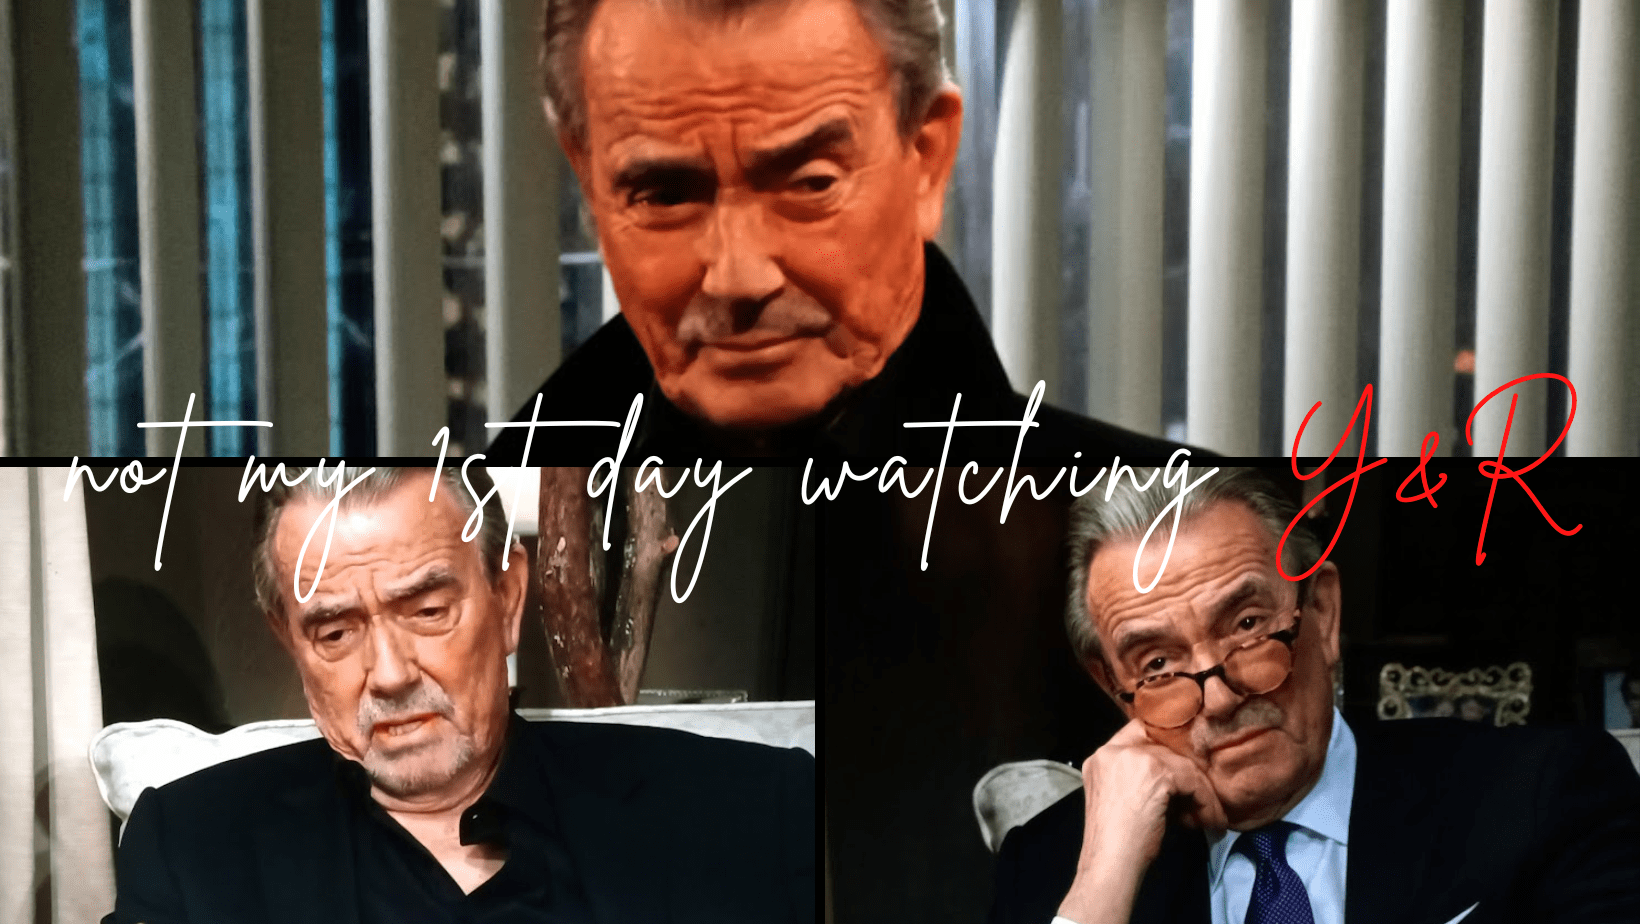 The Almighty Victor Newman, His Best Quotes on Y&R